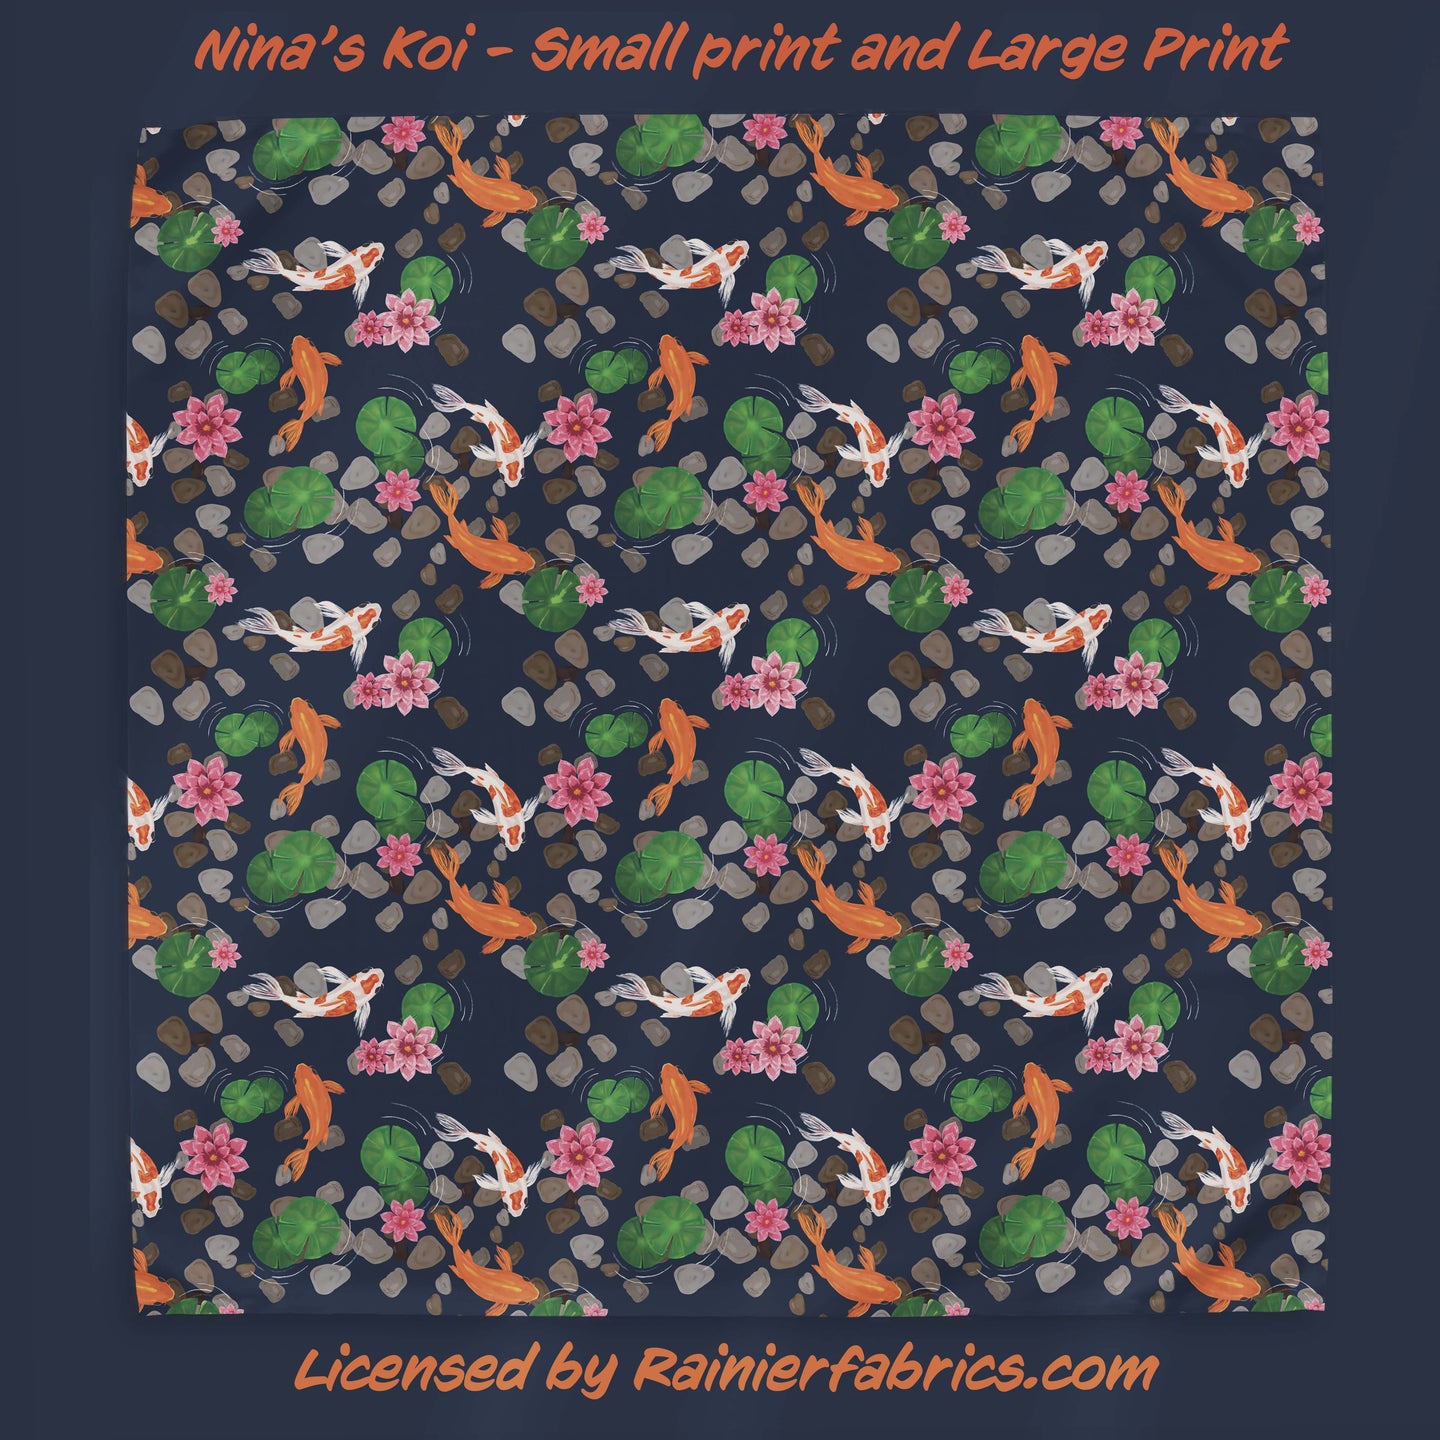 Koi by Nina - Rainier Fabrics Exclusive!!! - 3-5 day TAT - Order by 1/2 yard; Blankets and towels available too